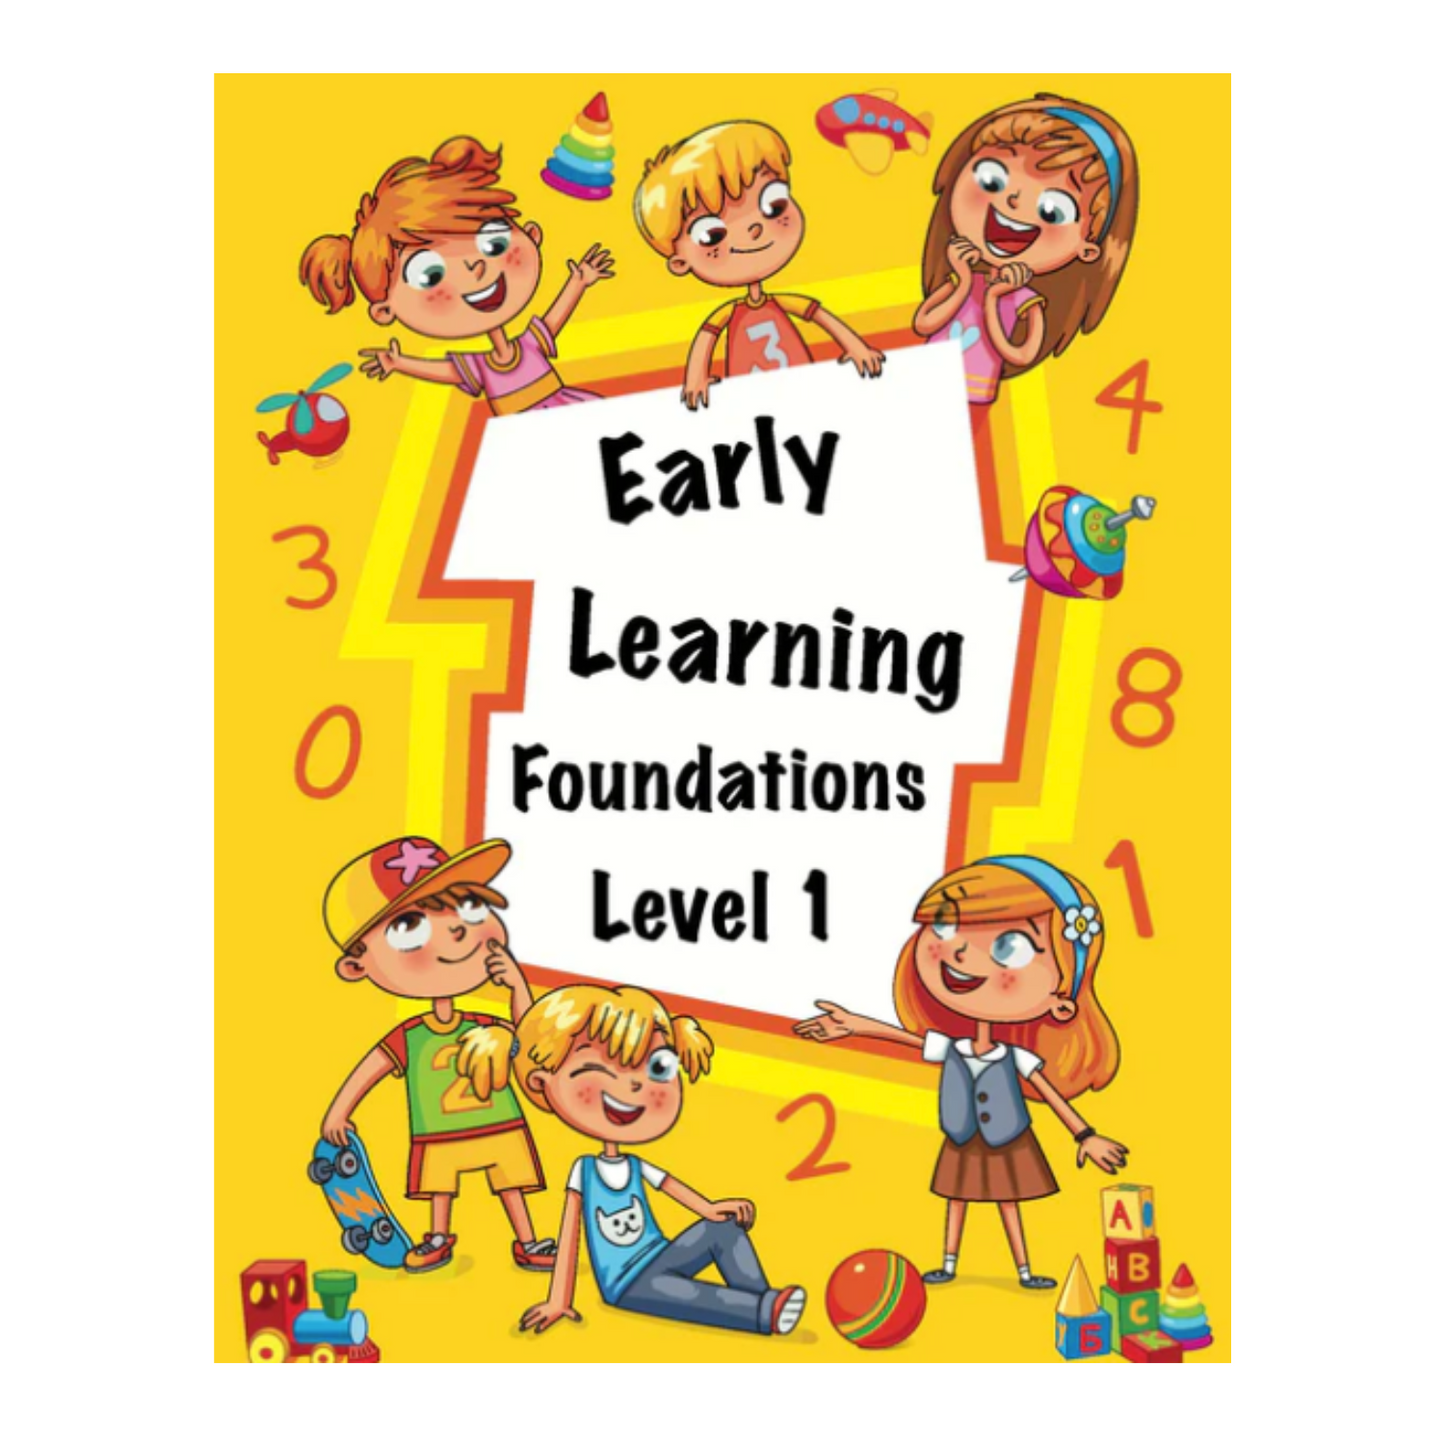 Early Learning Foundations Level 1 Student Workbook